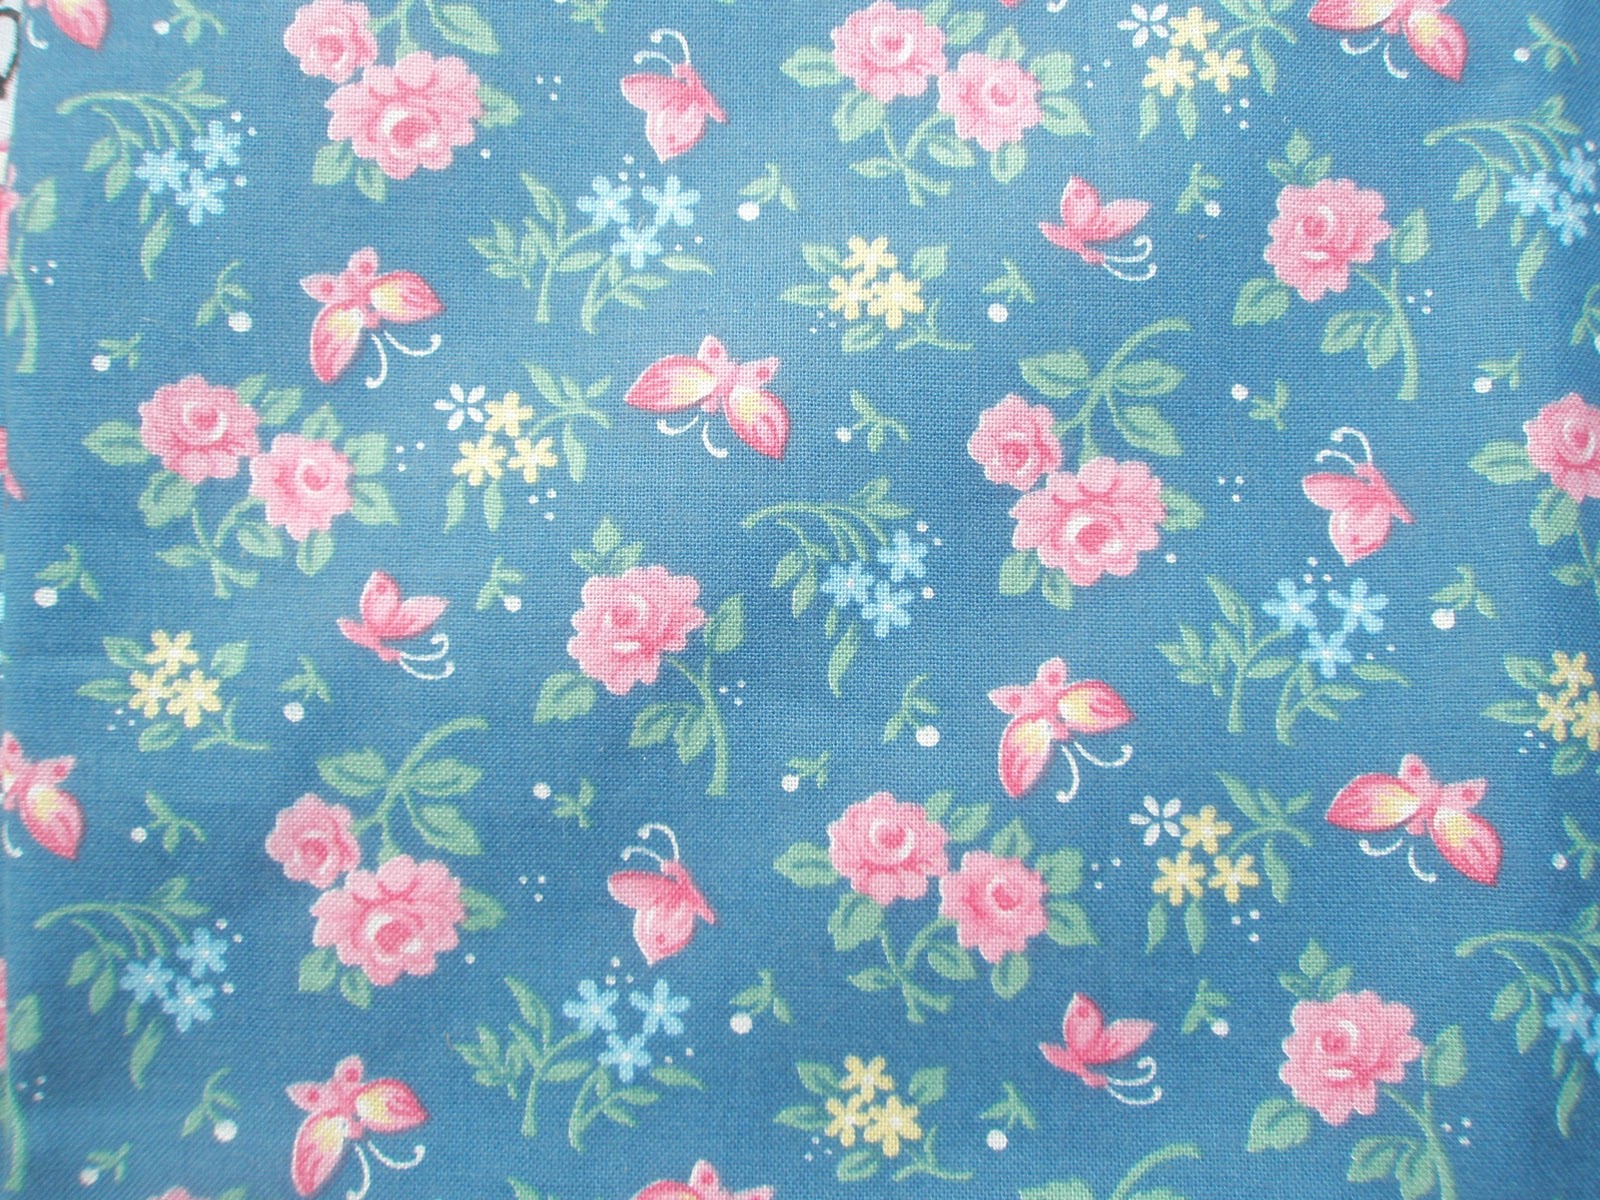 Necessities Vintage Floral Retro Girly Background Patterns Wallpaper